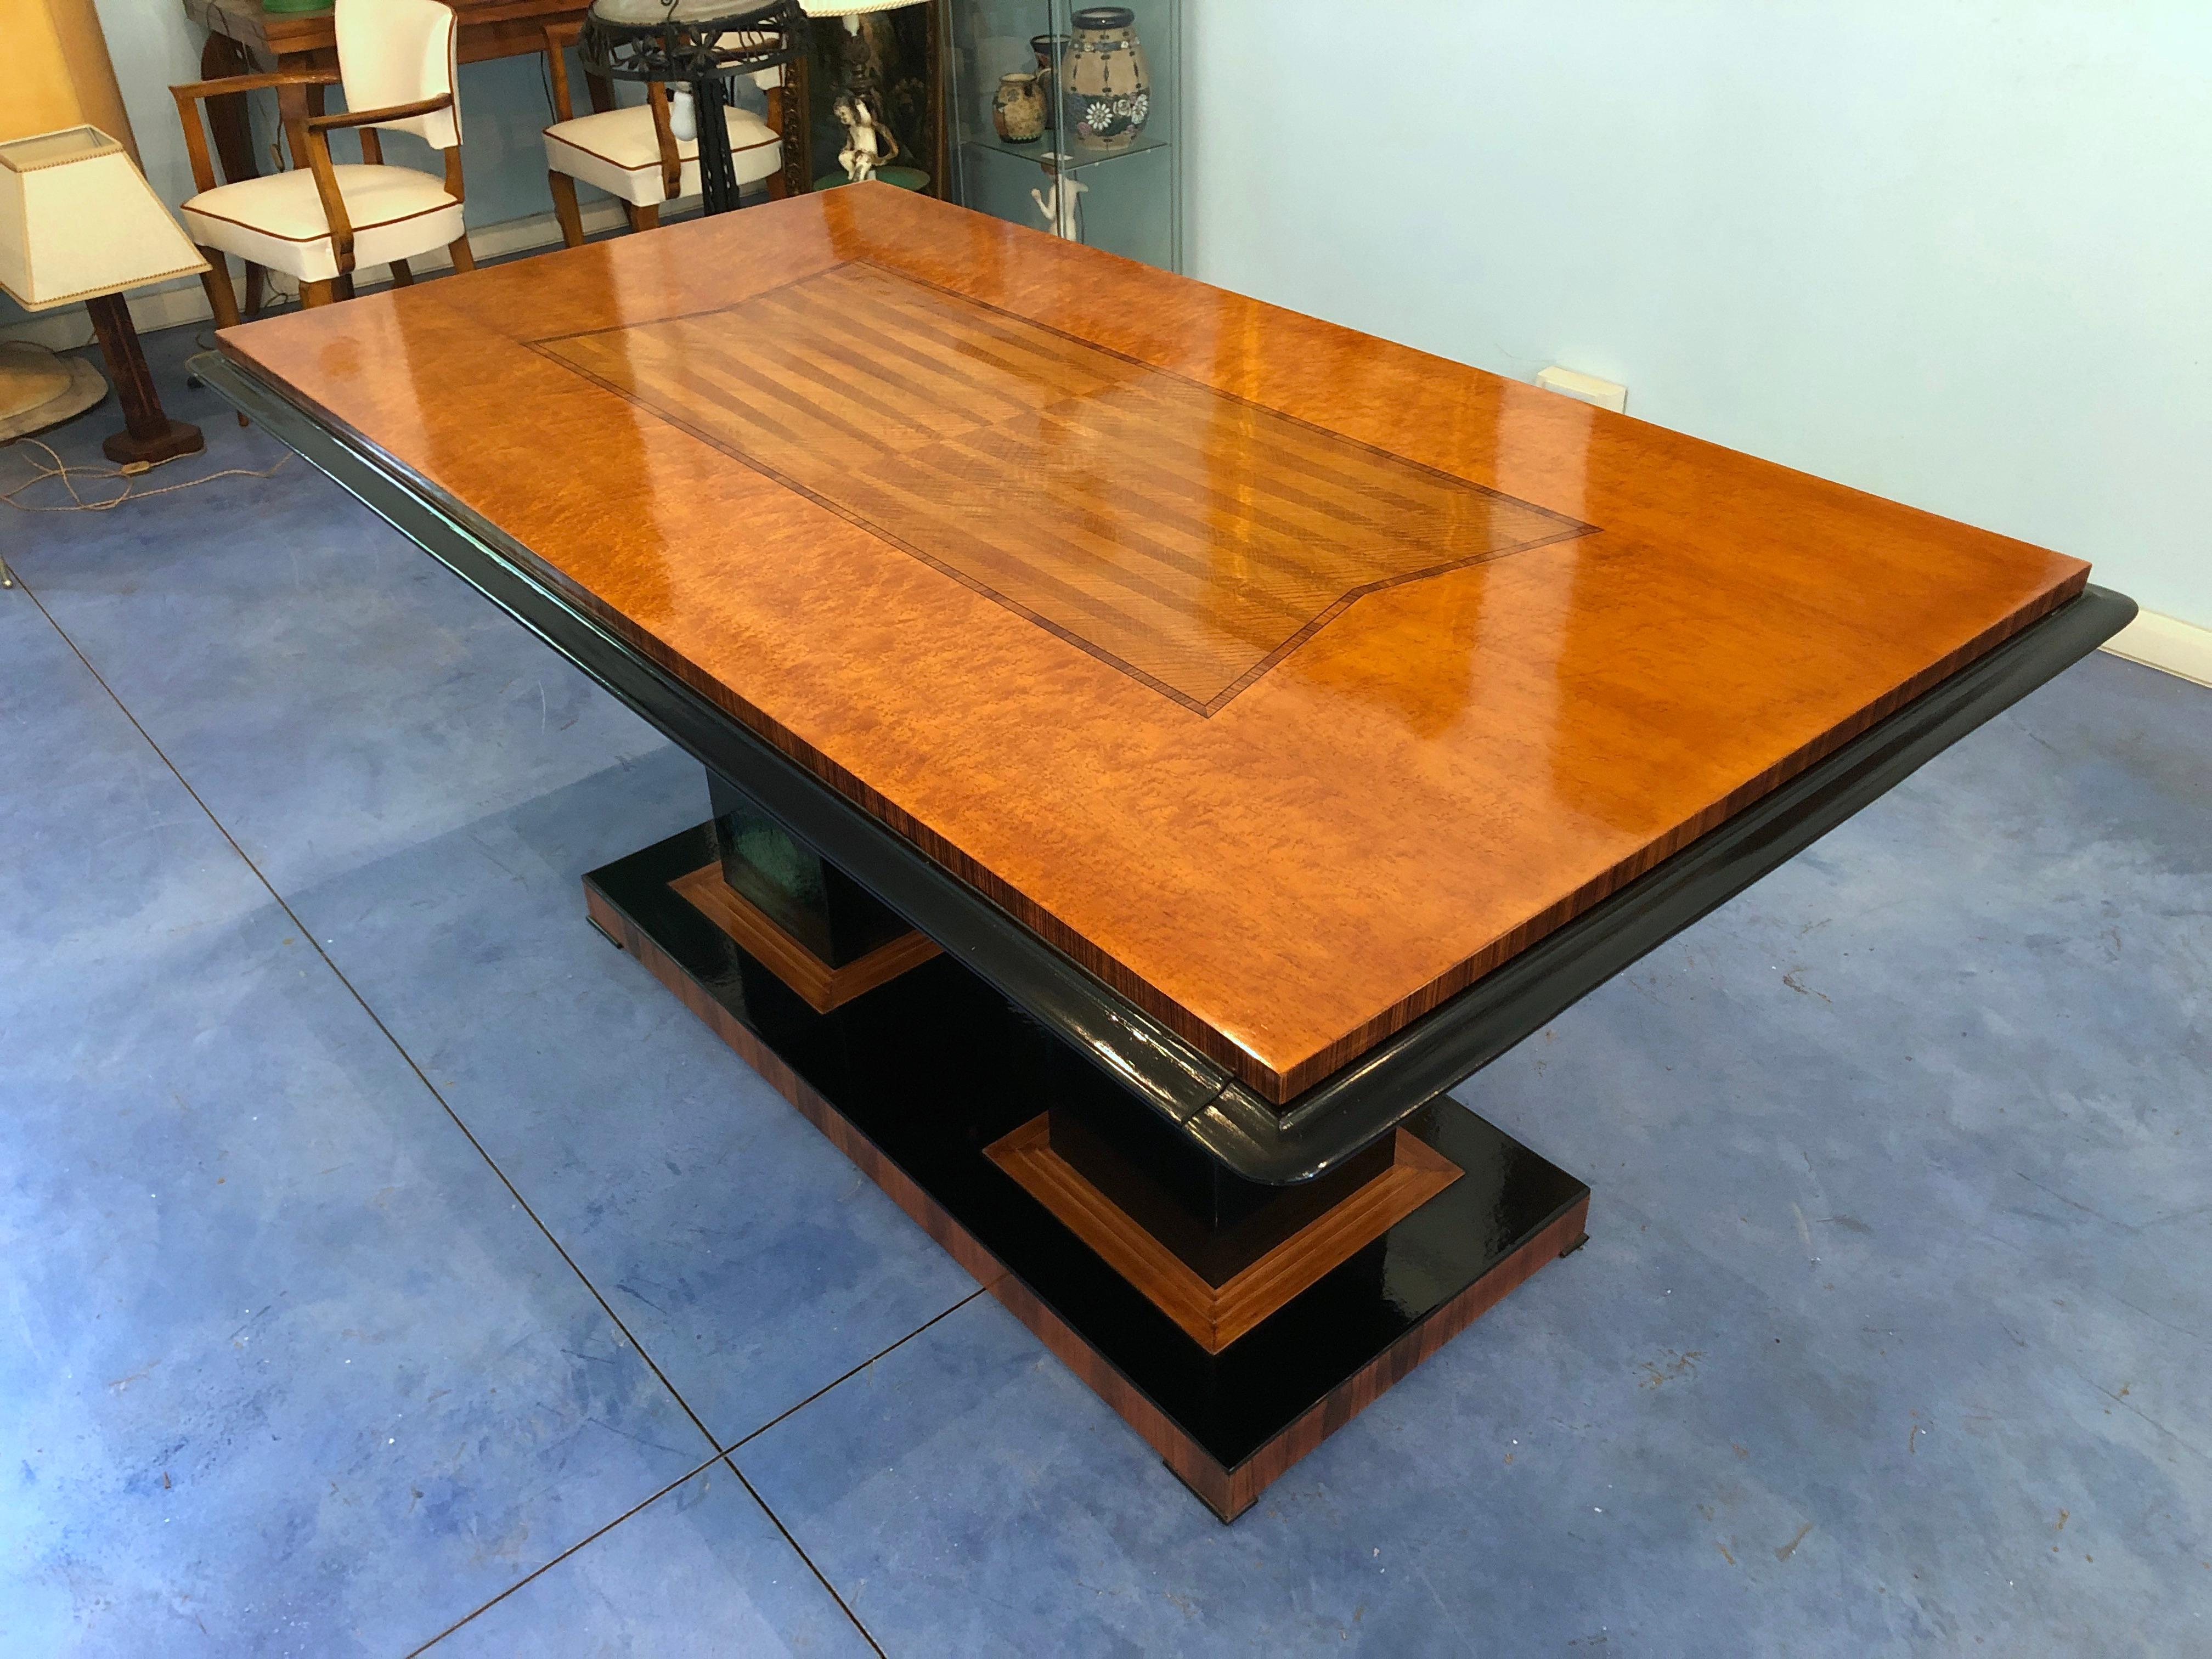 Italian Art Deco Dining Table in Maple with Decoration, 1940s For Sale 3